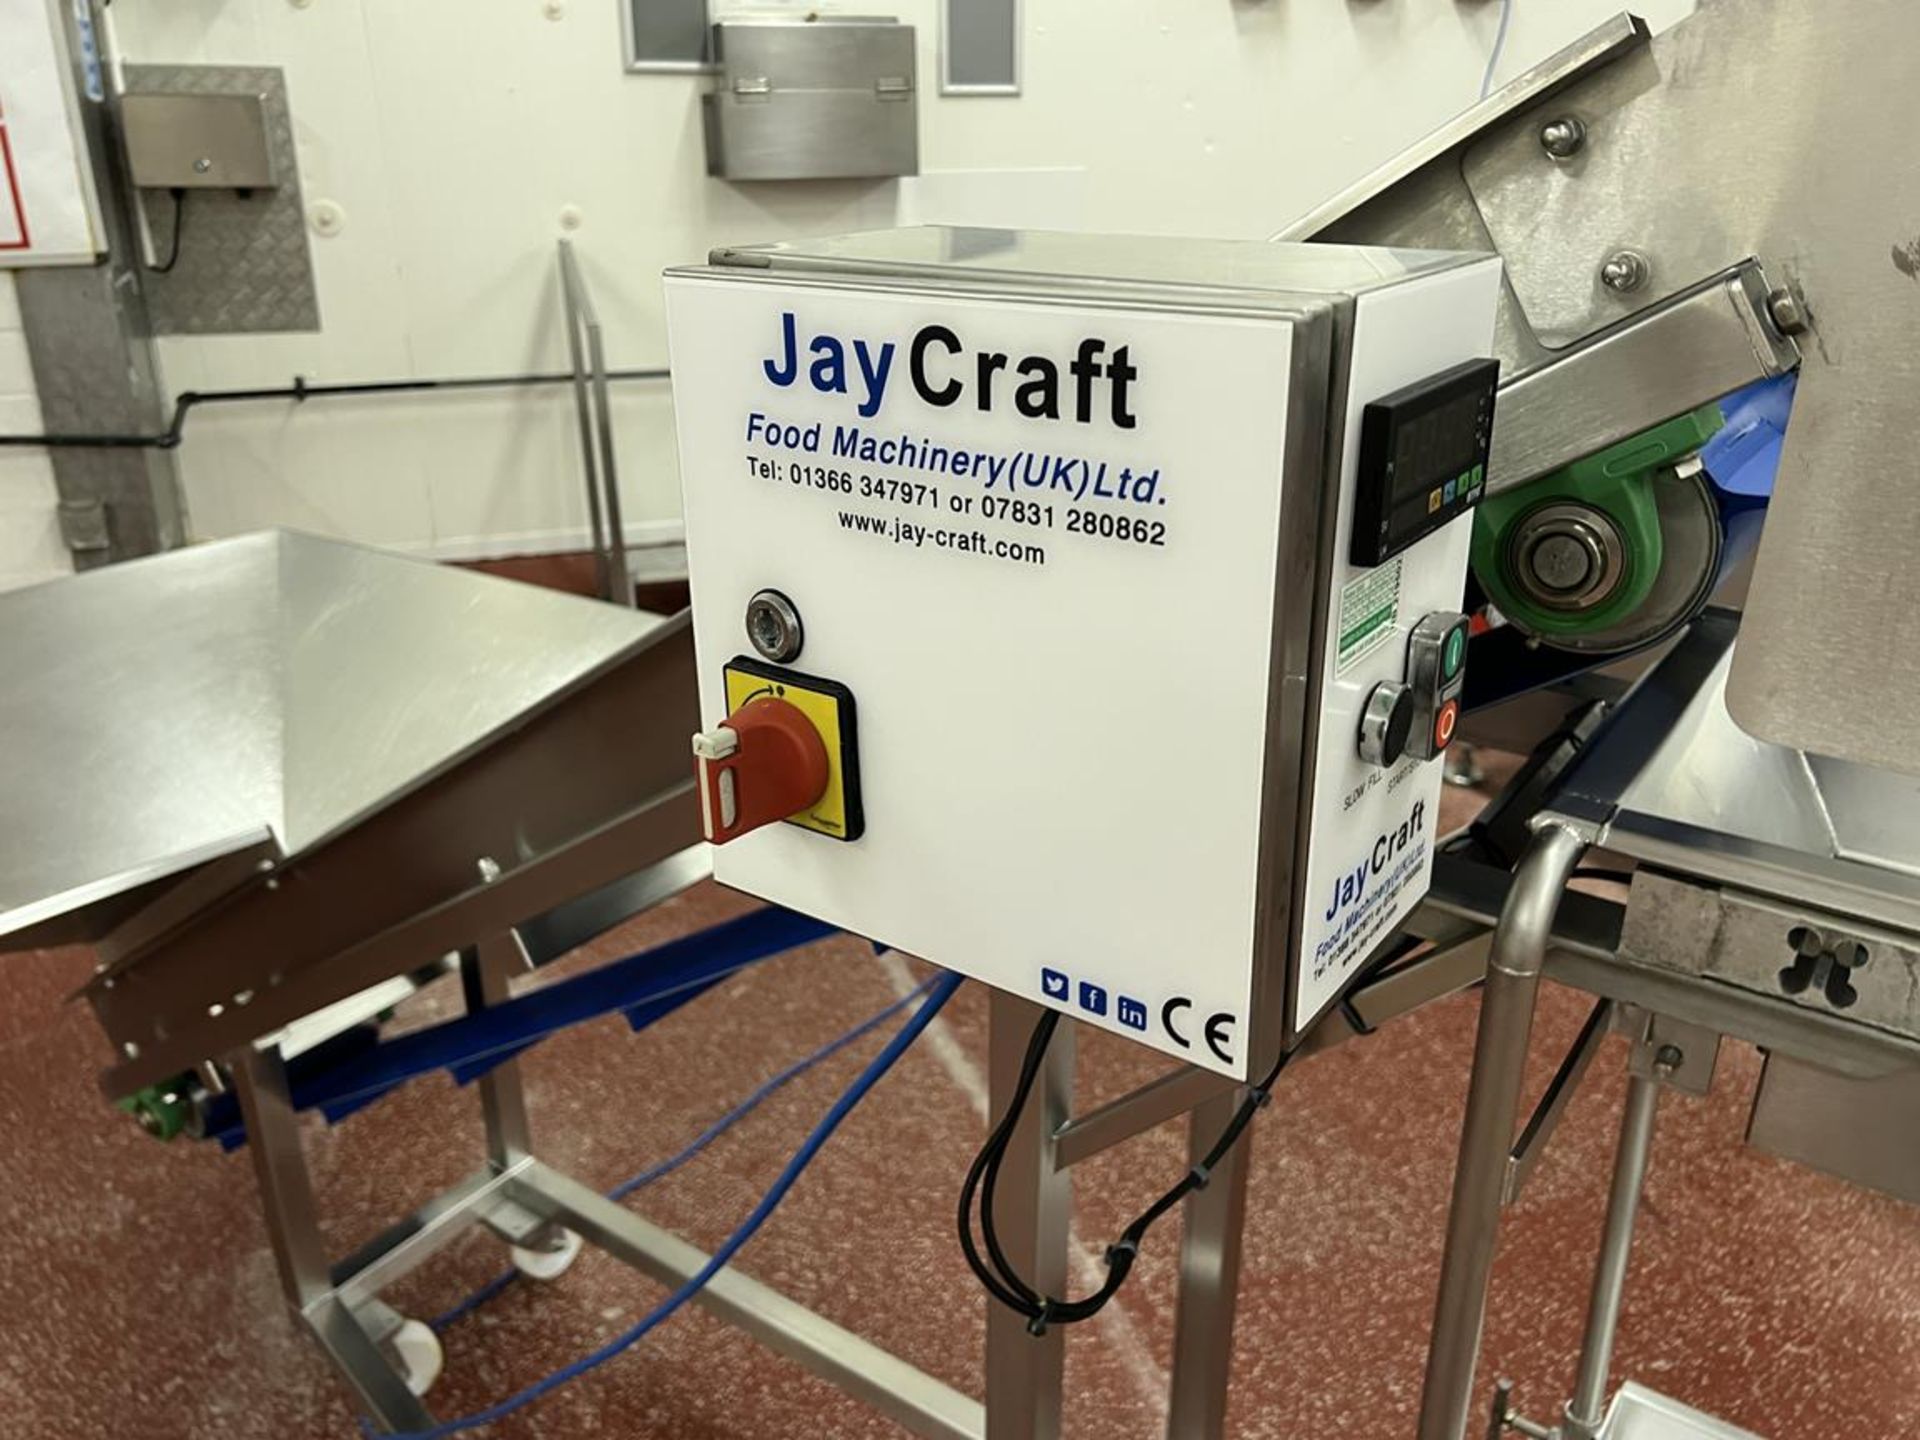 Jay Craft Food Machinery, slat bed elevated conveyor with speed controller, hopper 1000 x 1000, - Image 6 of 6